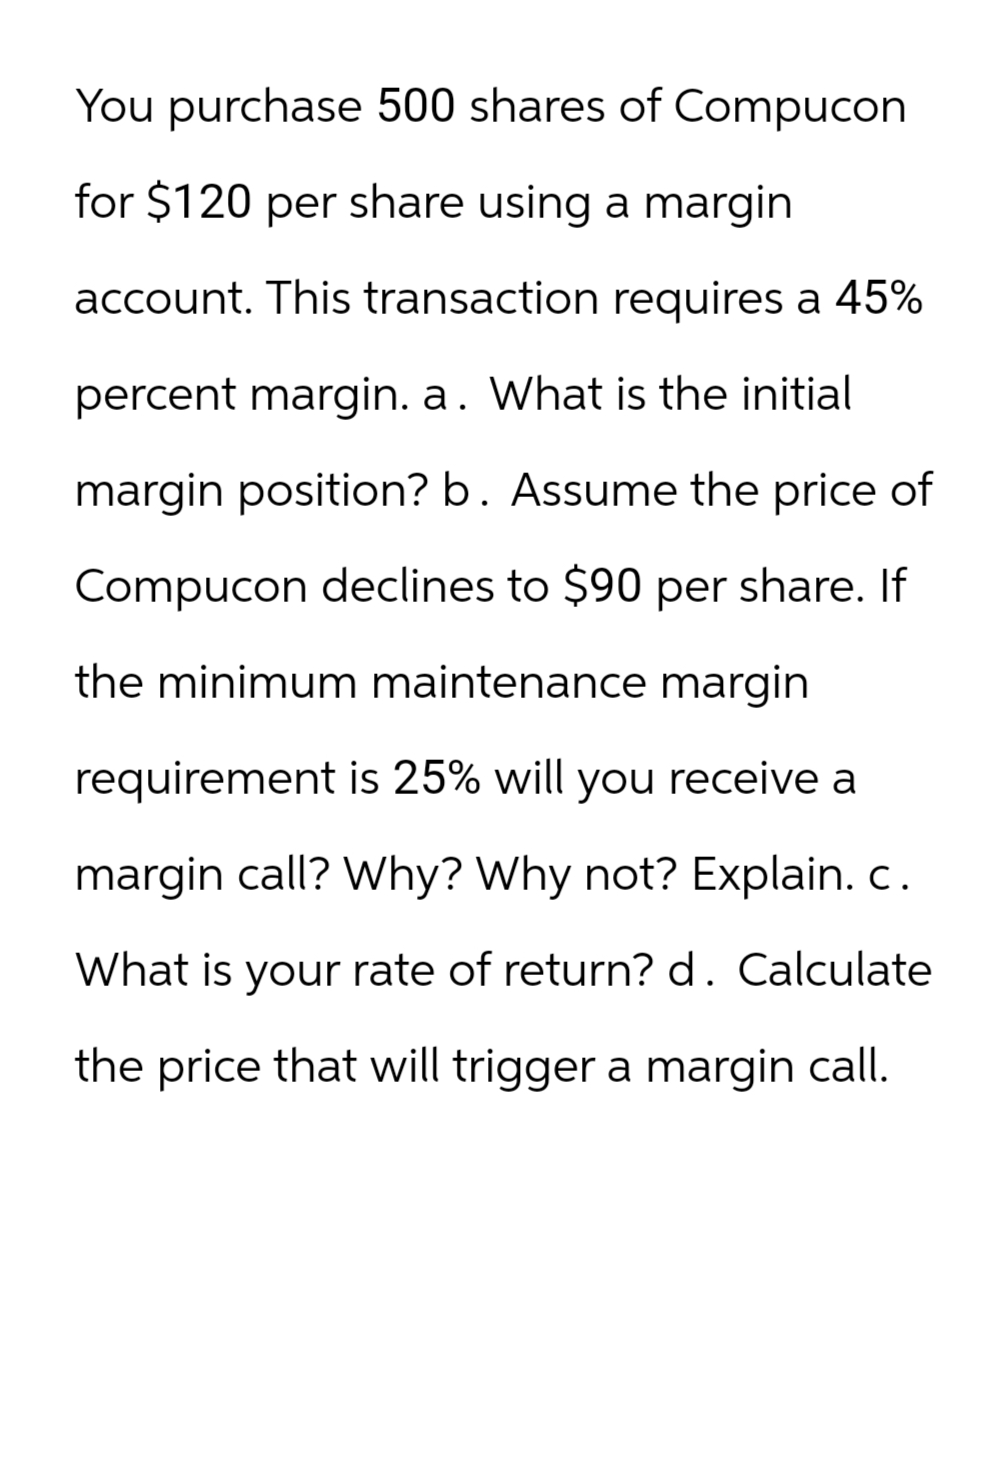 You purchase 500 shares of Compucon
for $120 per share using a margin
account. This transaction requires a 45%
percent margin. a. What is the initial
margin position? b. Assume the price of
Compucon declines to $90 per share. If
the minimum maintenance margin
requirement is 25% will you receive a
margin call? Why? Why not? Explain. c.
What is your rate of return? d. Calculate
the price that will trigger a margin call.